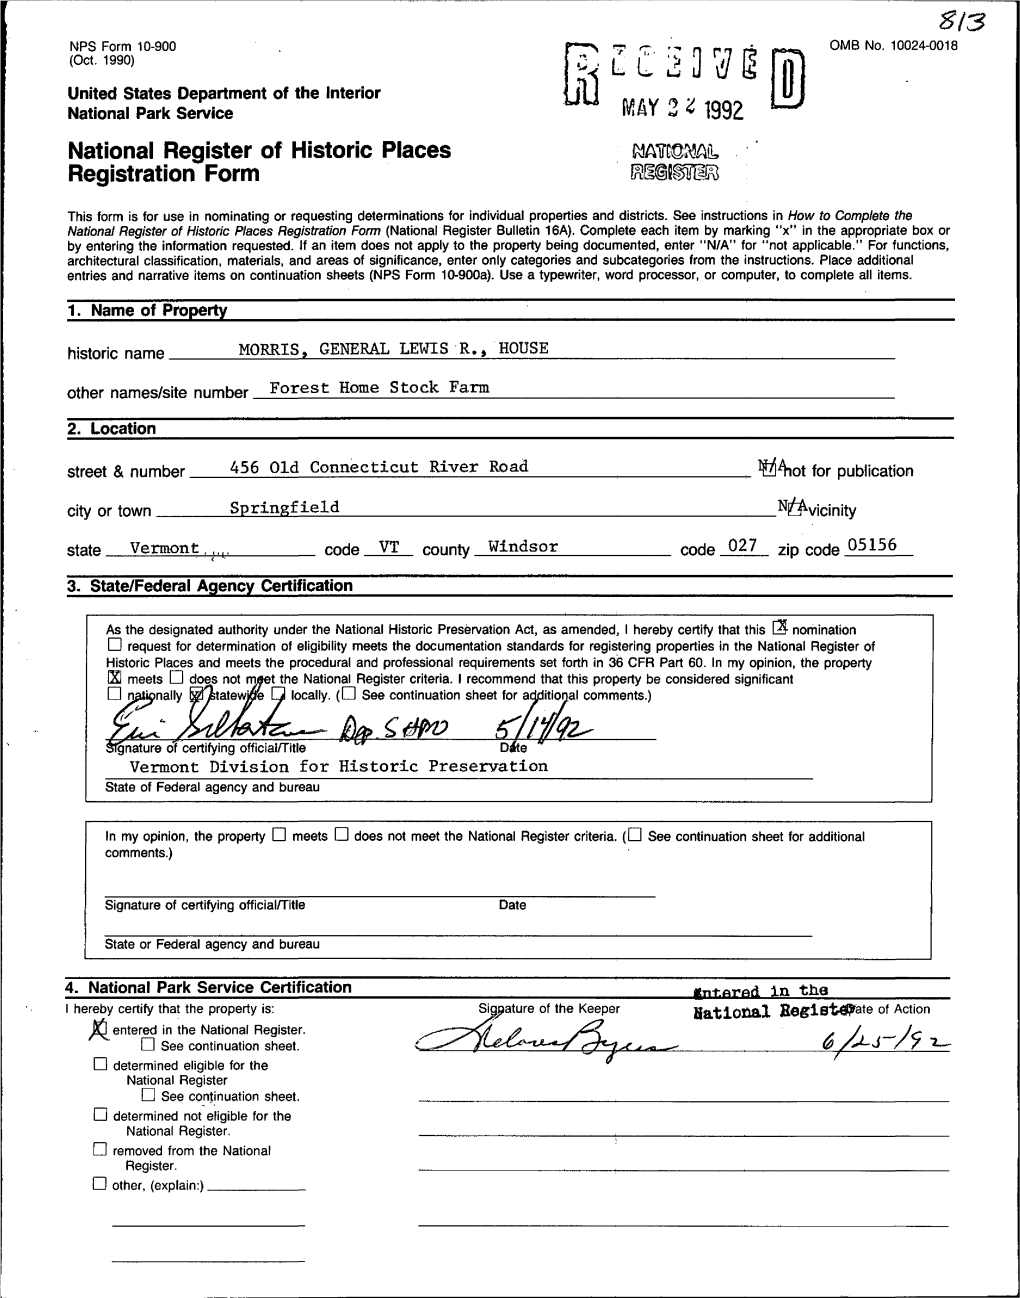 National Register of Historic Places Continuation Sheet Gen